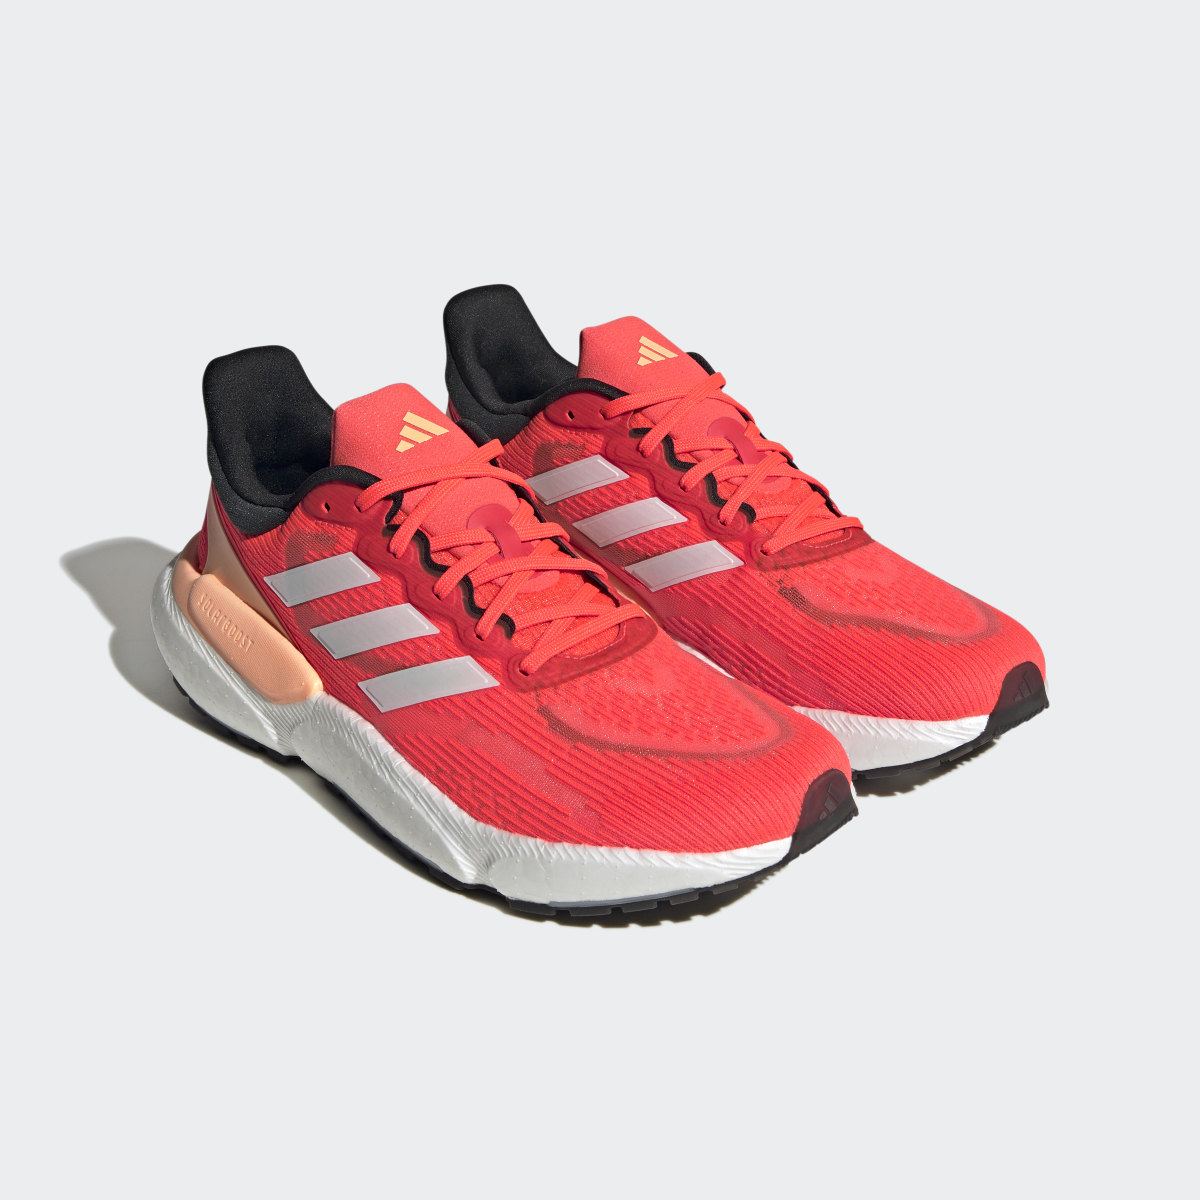 Adidas Solarboost 5 Shoes. 5